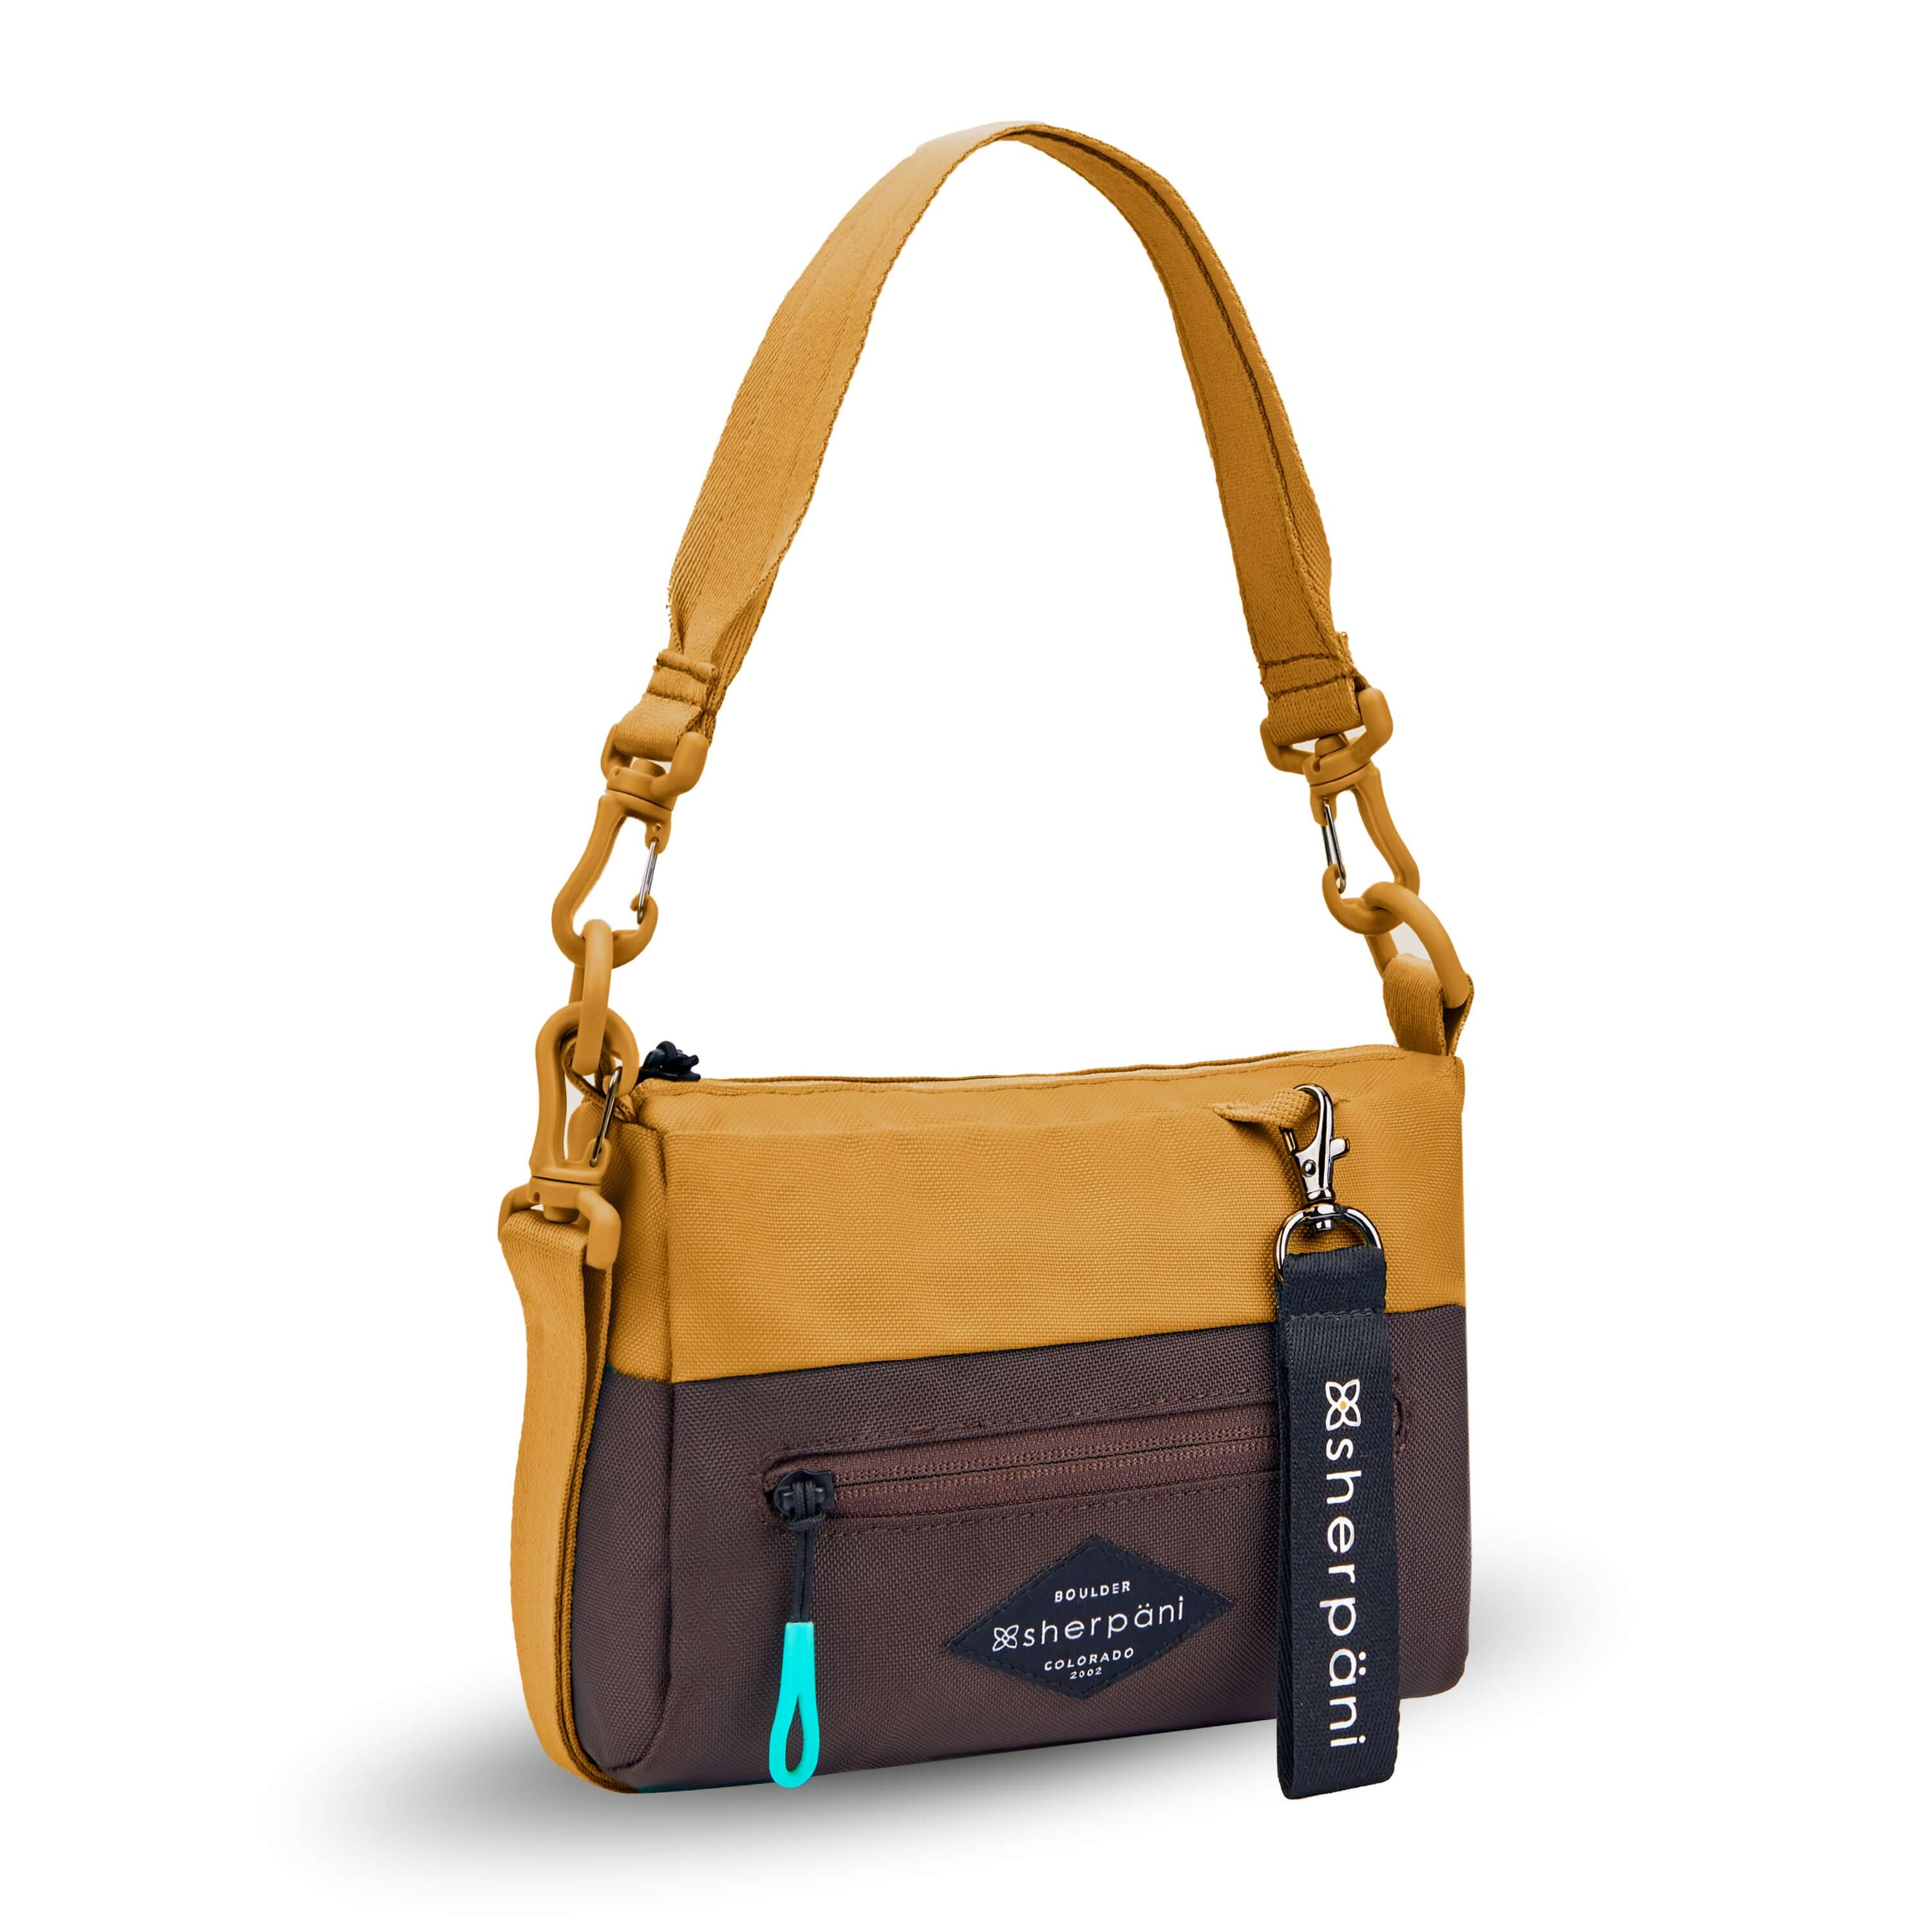 Angled front view of Sherpani's purse, the Skye in Sundial. It is two toned, the top half of the bag is burnt yellow and the bottom half of the bag is brown. There is an external zipper compartment with an easy pull zipper accented in aqua. There is a branded Sherpani keychain clipped to the upper right corner. The bag has a detachable short strap and a longer detachable/adjustable crossbody strap. 